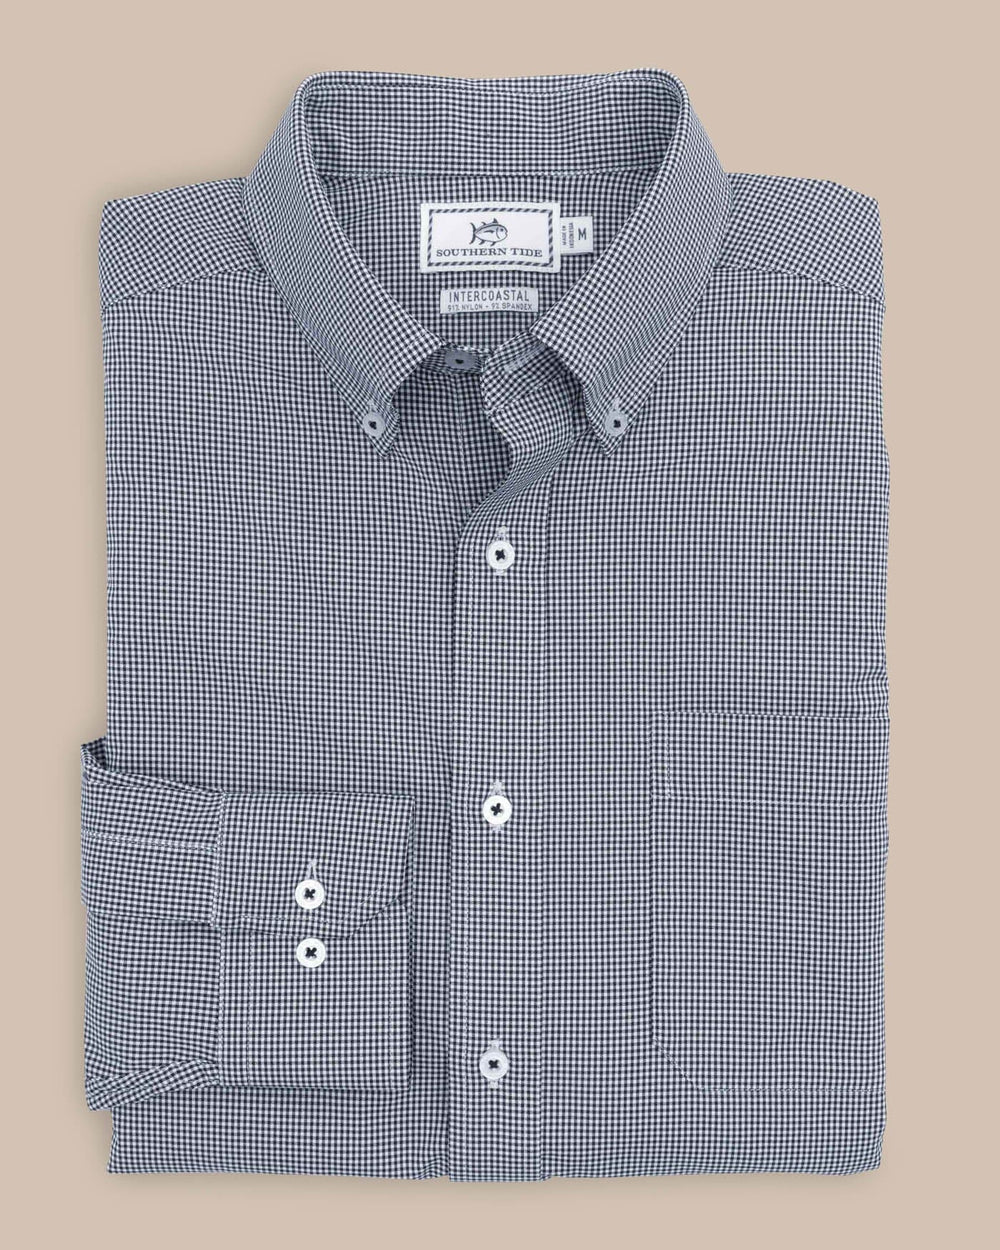 The front view of the Southern Tide Team Colors Gingham Intercoastal Sport Shirt by Southern Tide - Navy